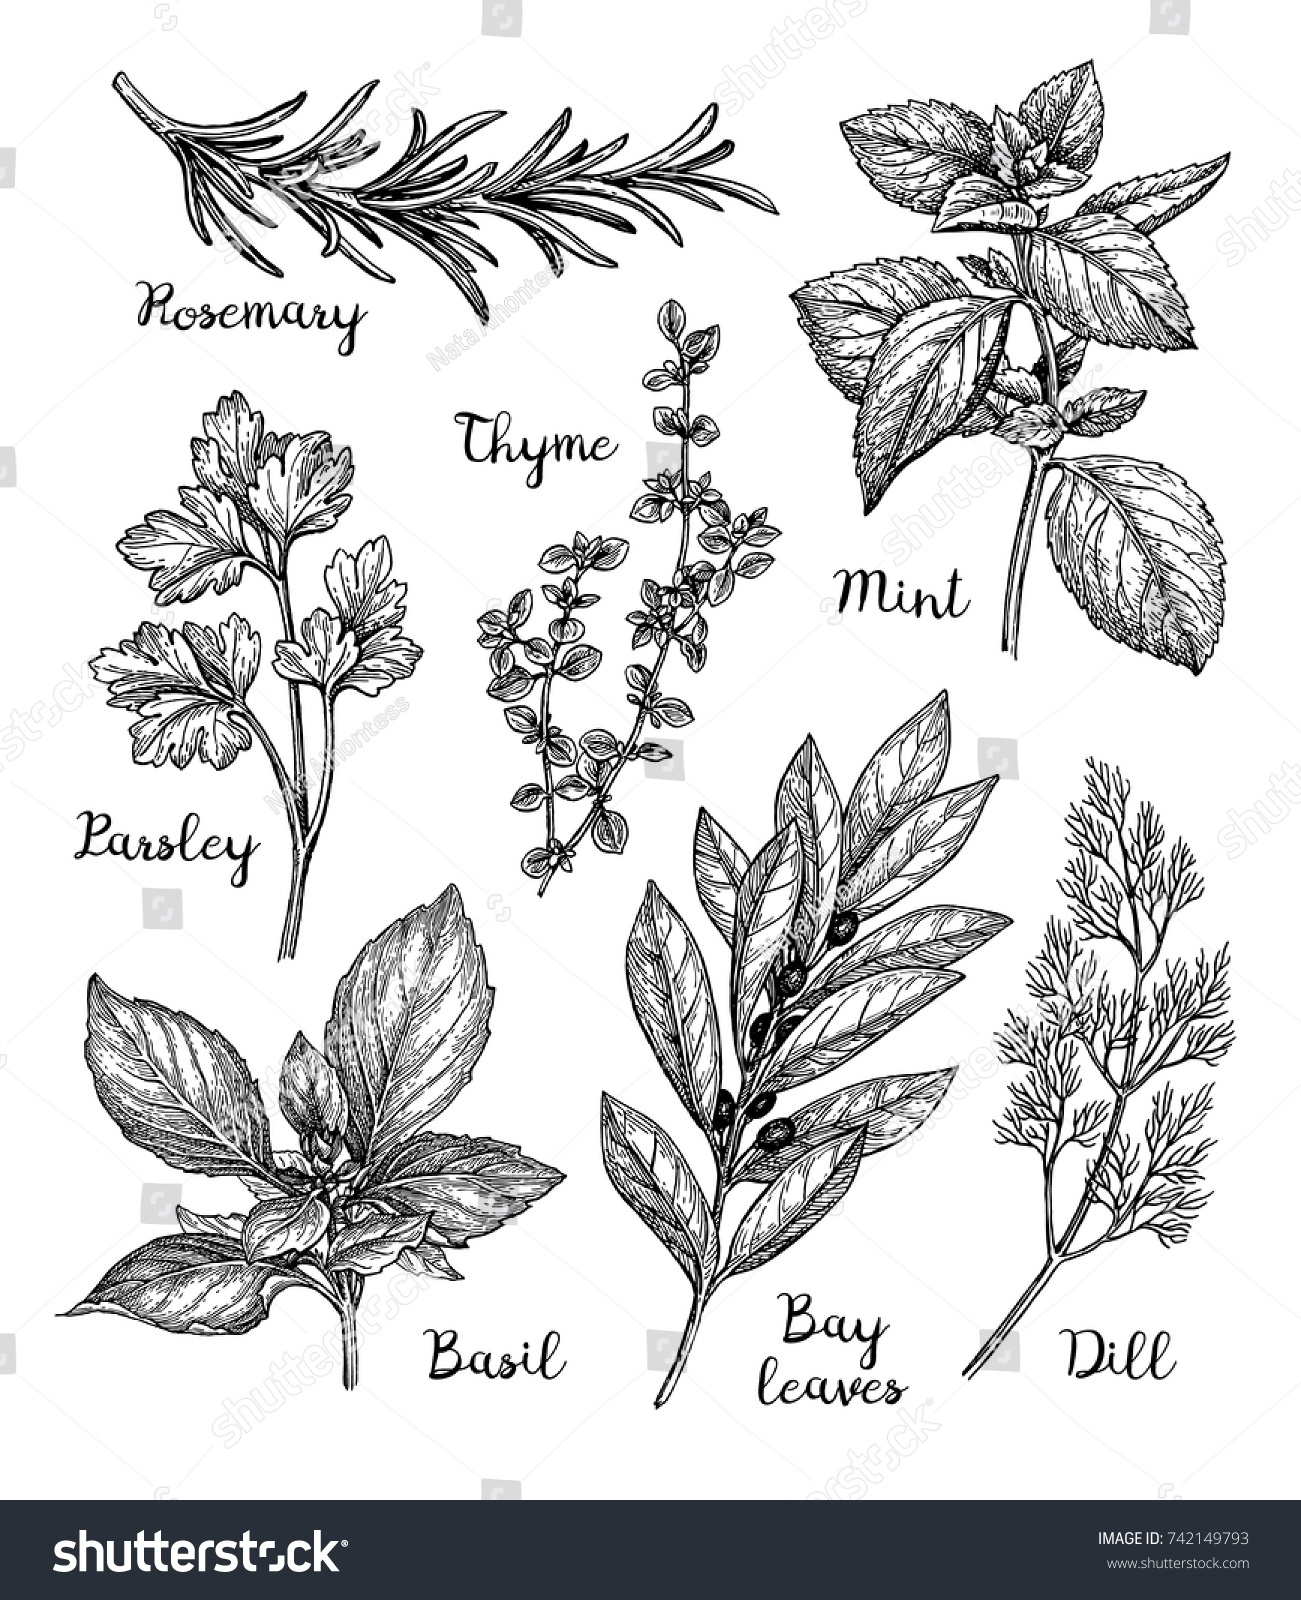 Herbs set. Ink sketch isolated on white background. Hand drawn vector illustration. Retro style.